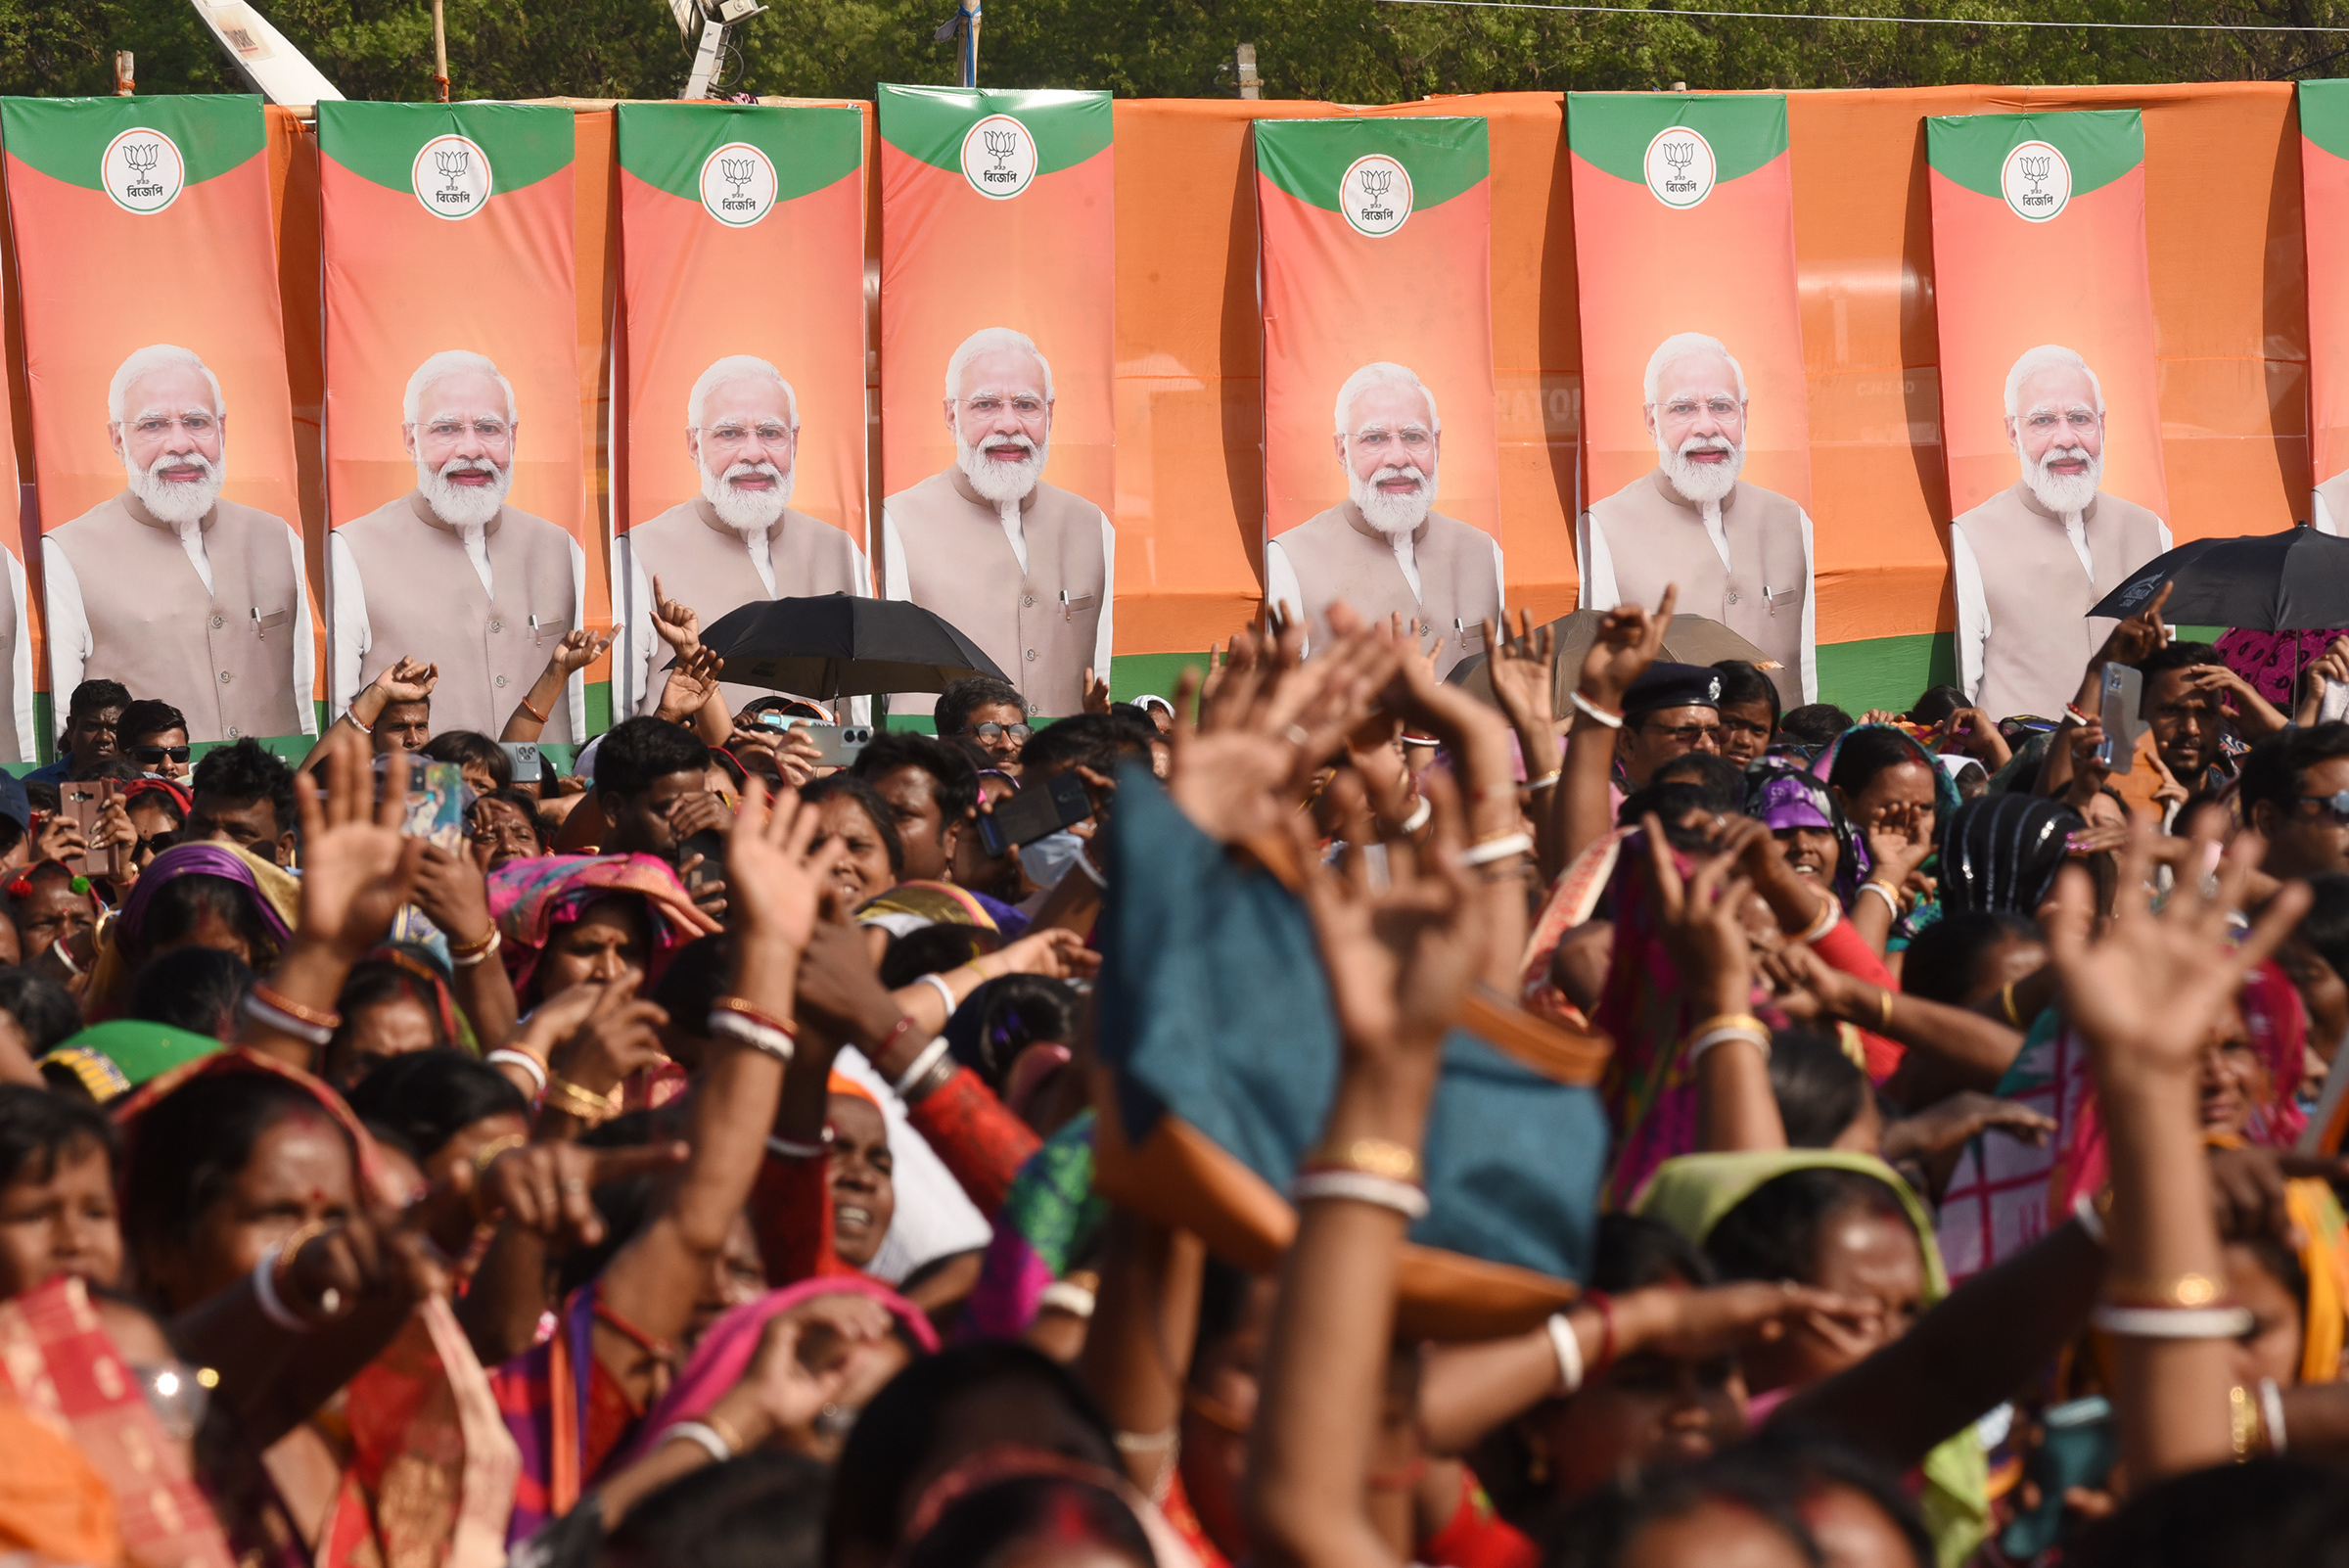 BJP supporters greet Prime Minister Narendra Modi during a rally in Arambagh, India, on March 1.